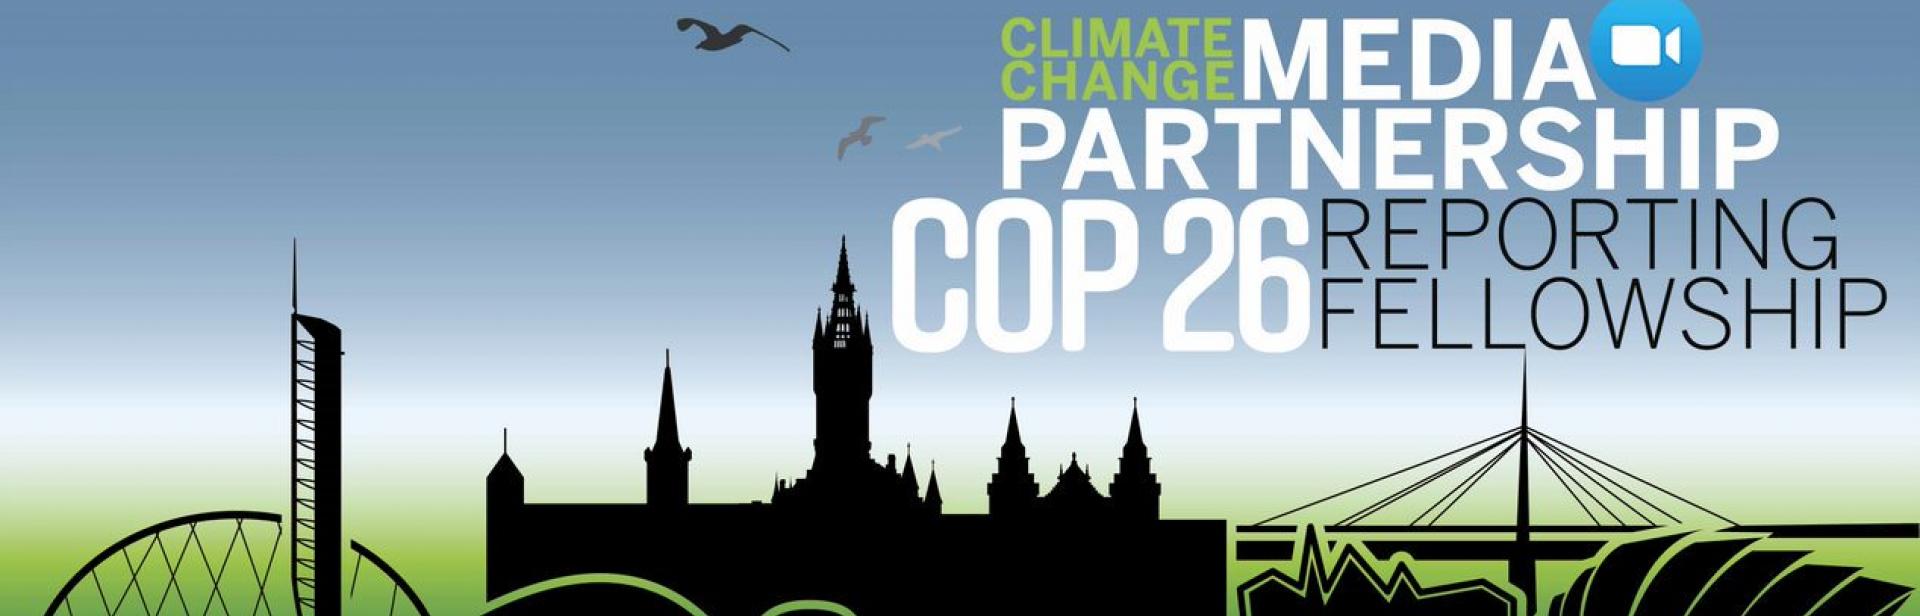 banner image of cop26